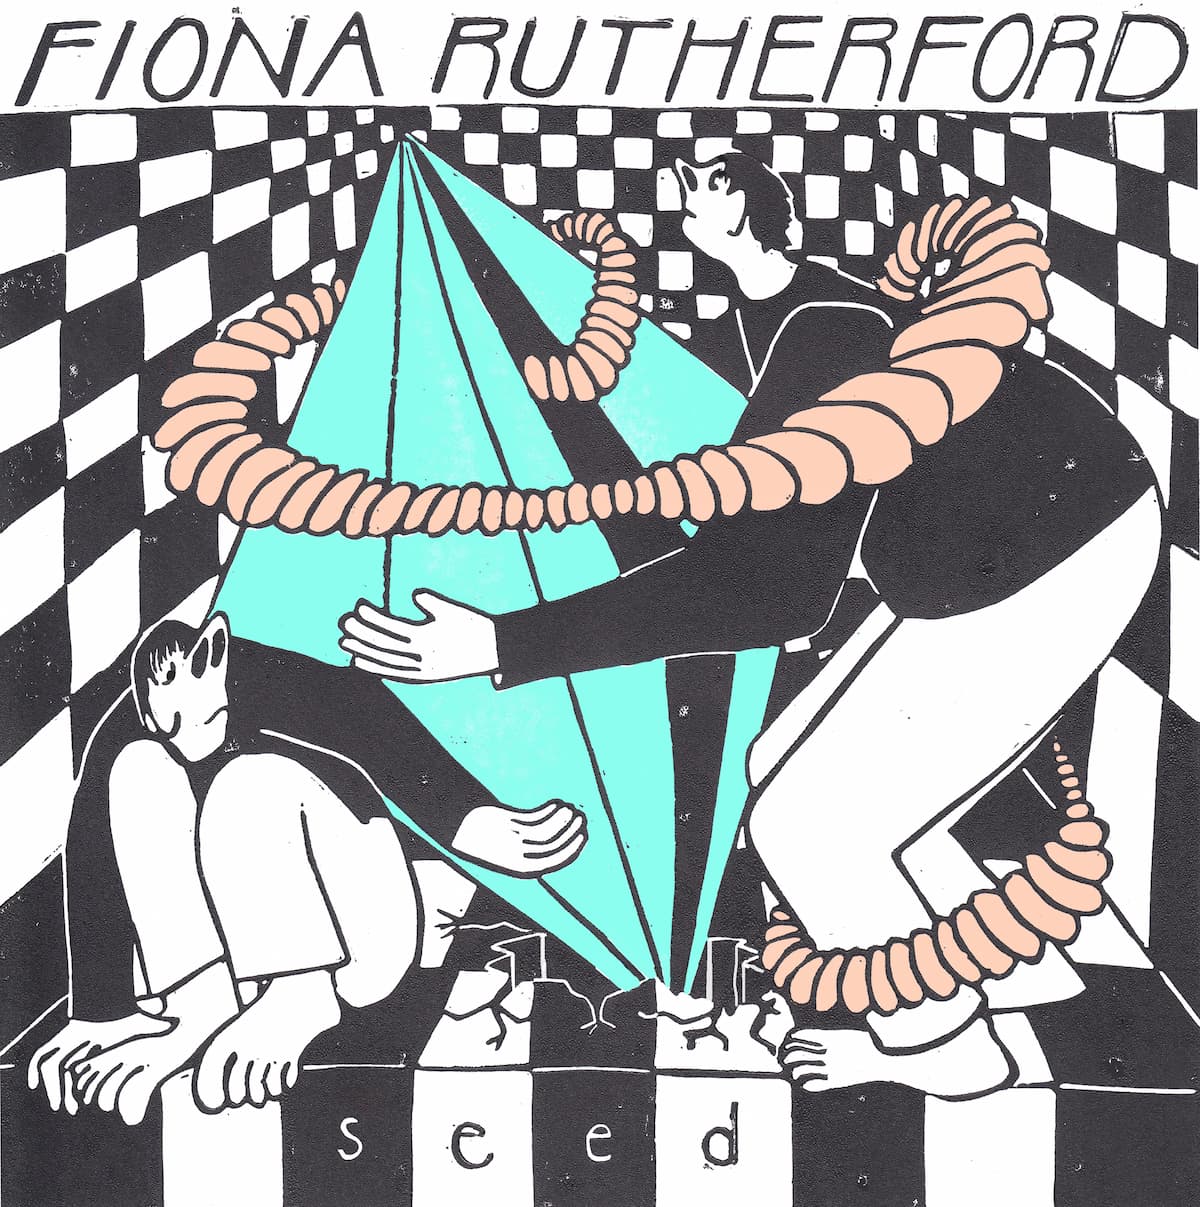 Fiona Rutherford's album "Seed"